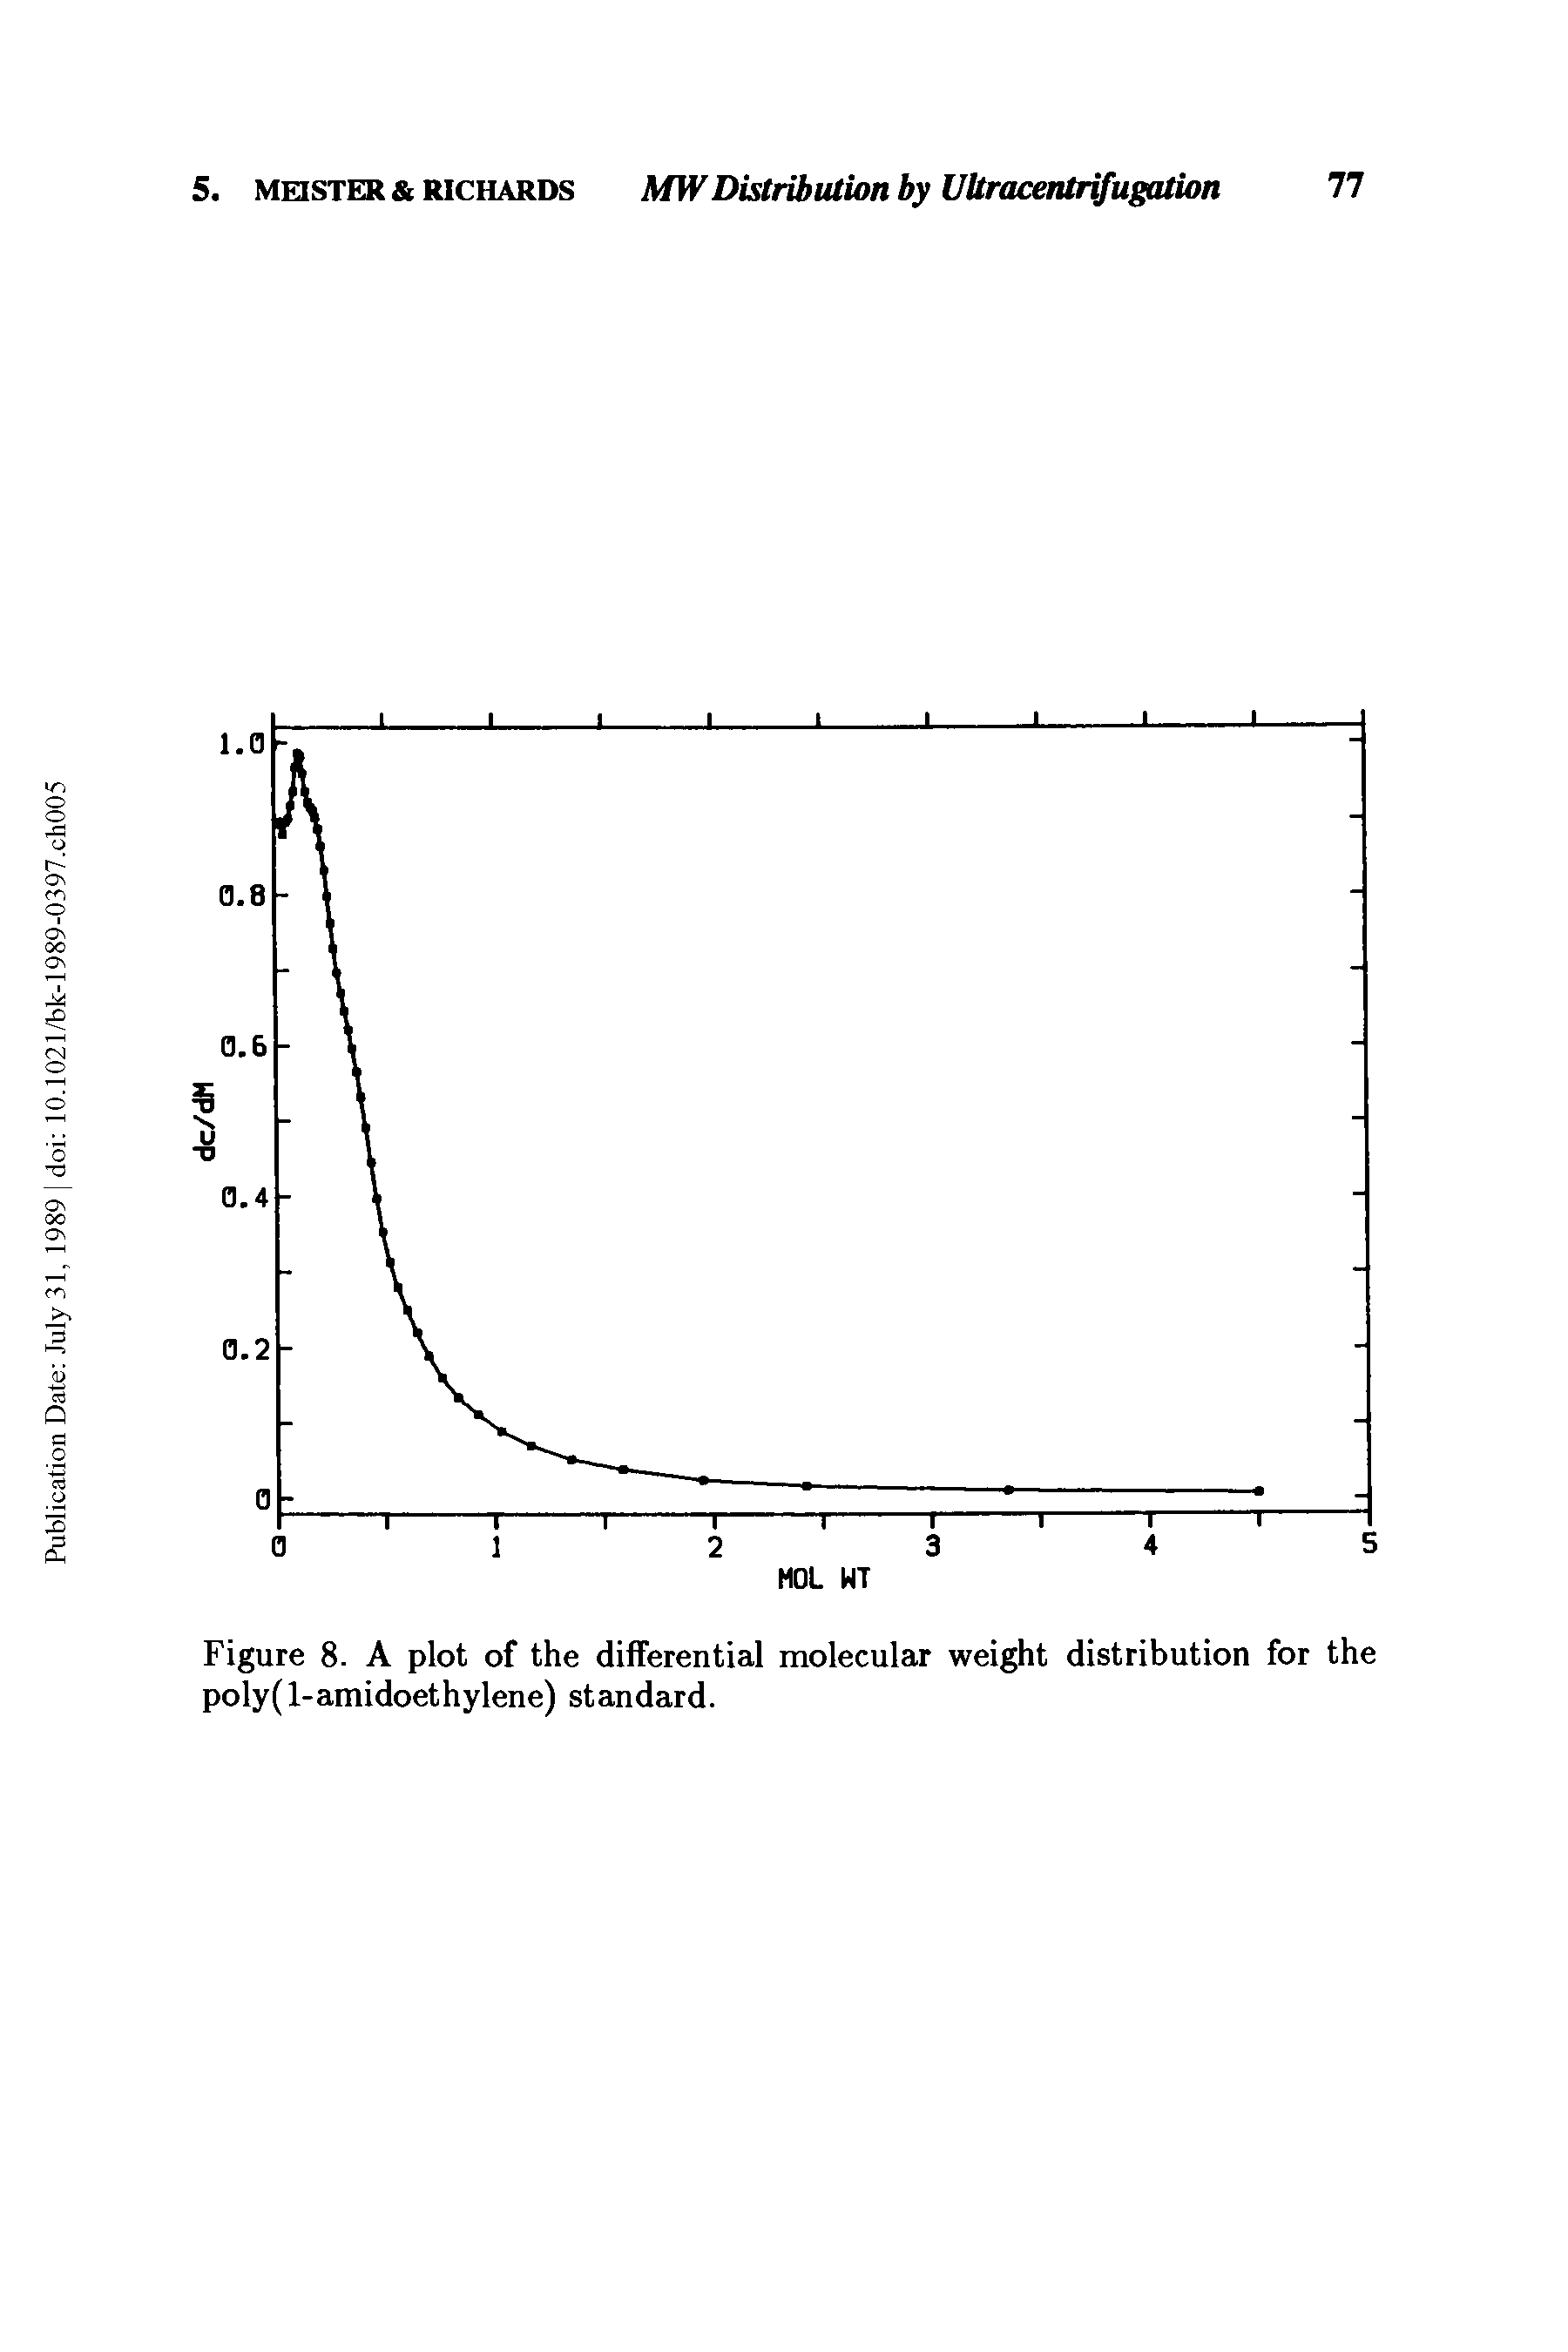 Figure 8. A plot of the differential molecular weight distribution for the poly(l-amidoethylene) standard.